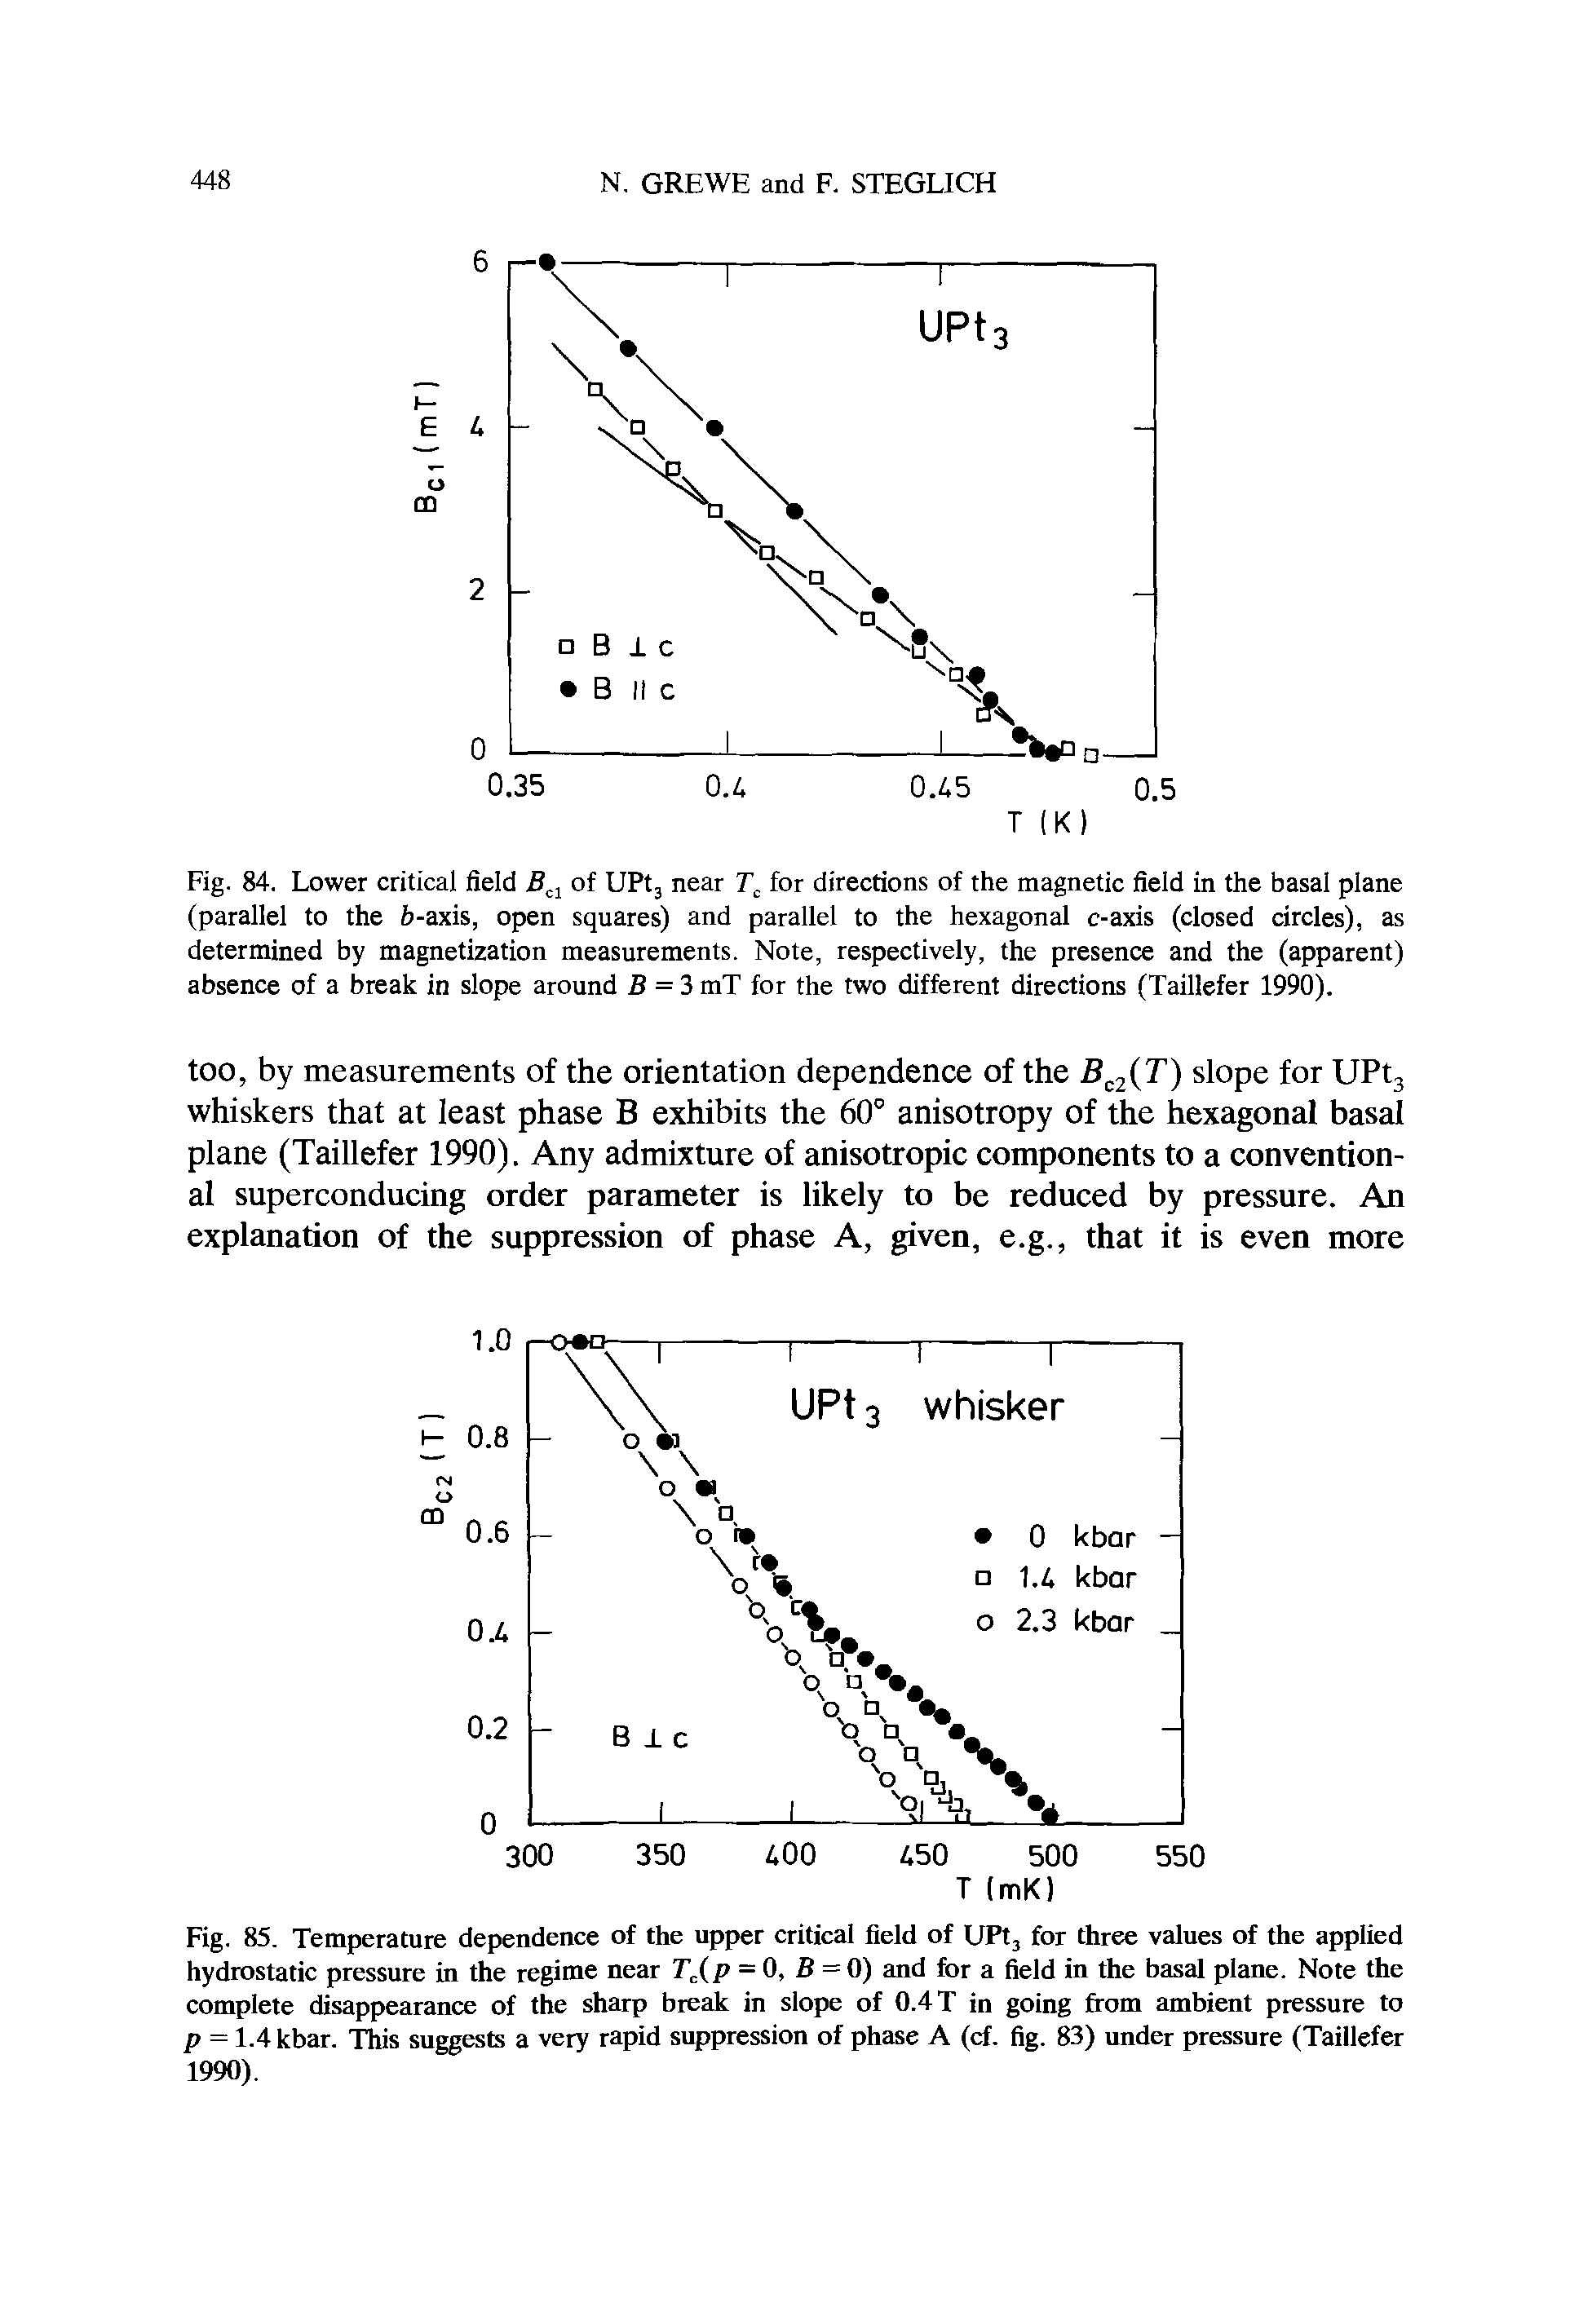 Fig. 85. Temperature dependence of the upper critical field of UPt, for three values of the applied hydrostatic pressure in the regime near TXp = 0, B = 0) and for a field in the basal plane. Note the complete disappearance of the sharp break in slope of 0.4 T in going from ambient pressure to p = 1.4 kbar. This suggests a very rapid suppression of phase A (cf. fig. 83) under pressure (Taillefer 1990).